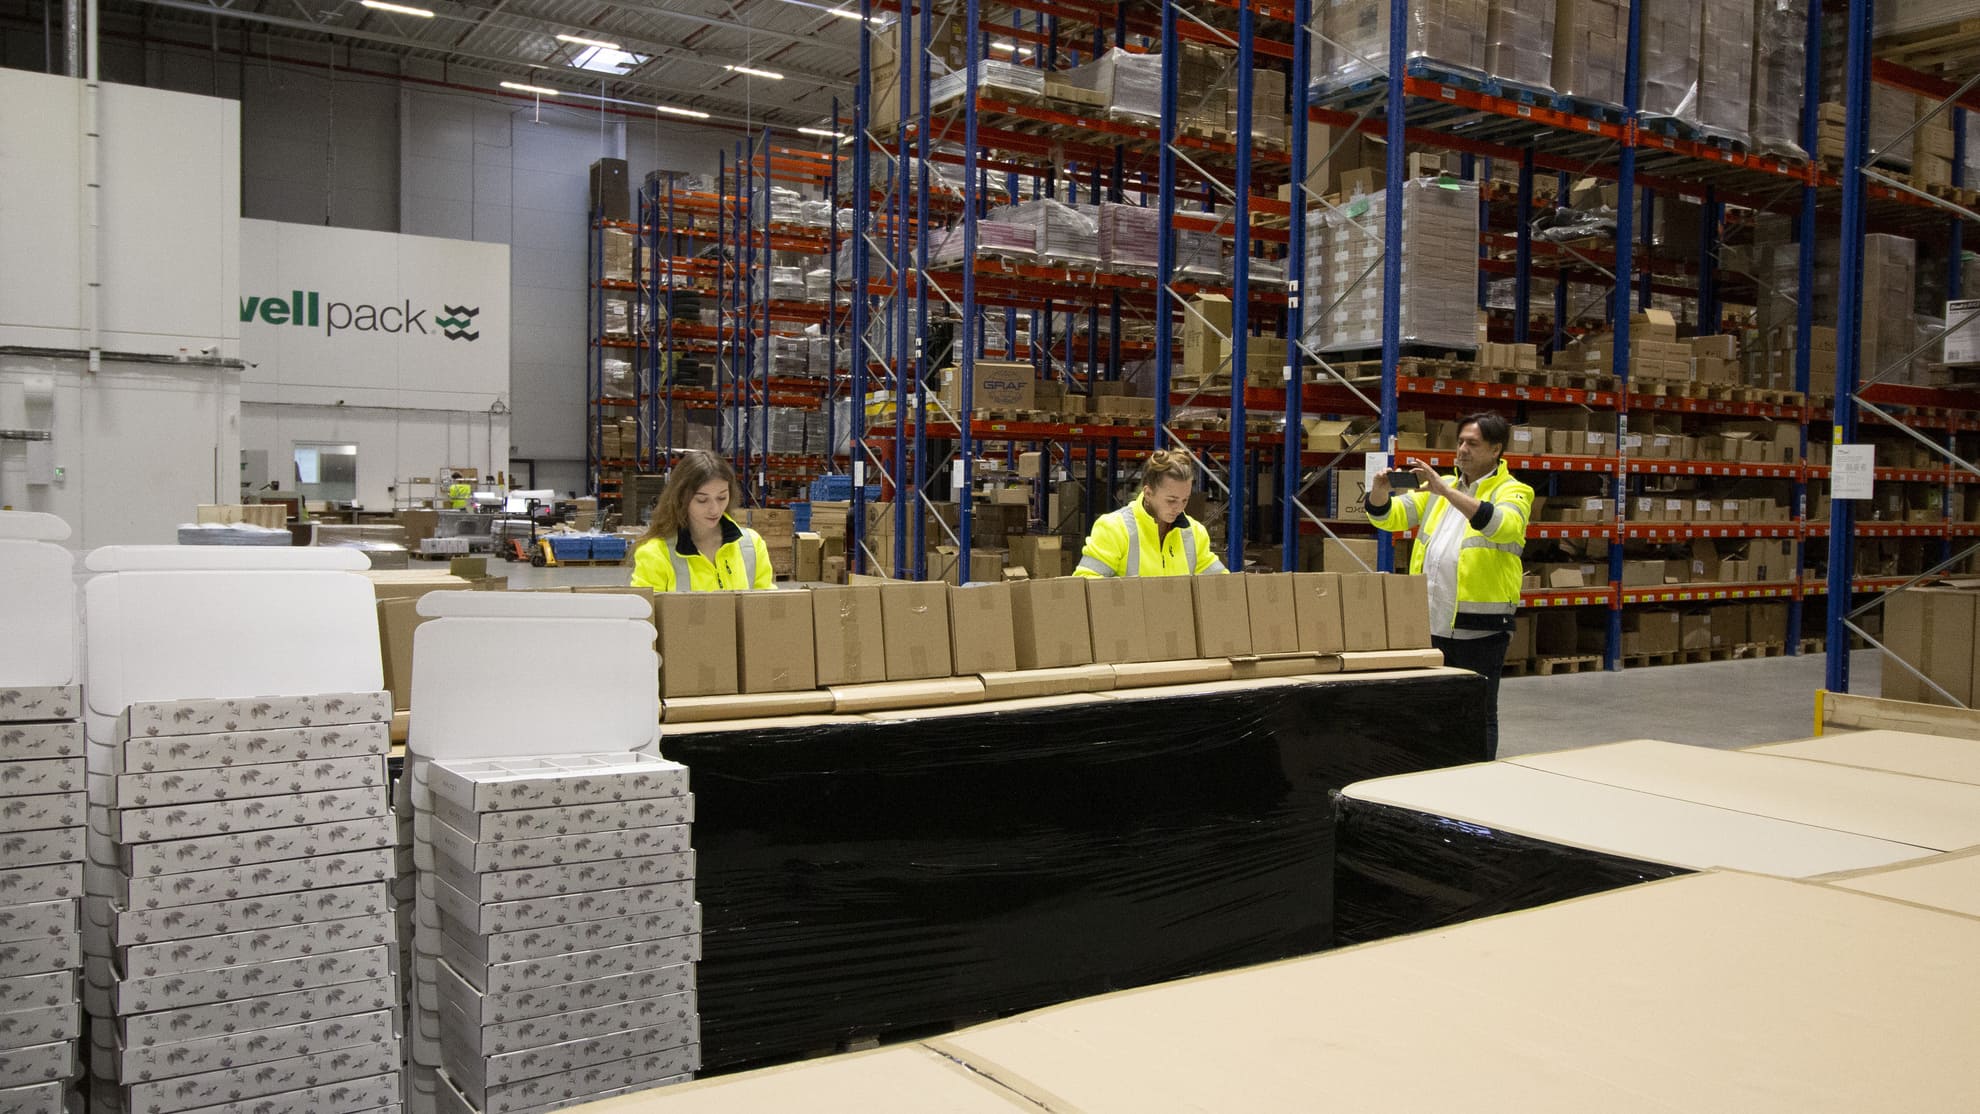 Fulfillment Center VS Warehouse VS Distribution Center: What’s the Difference?